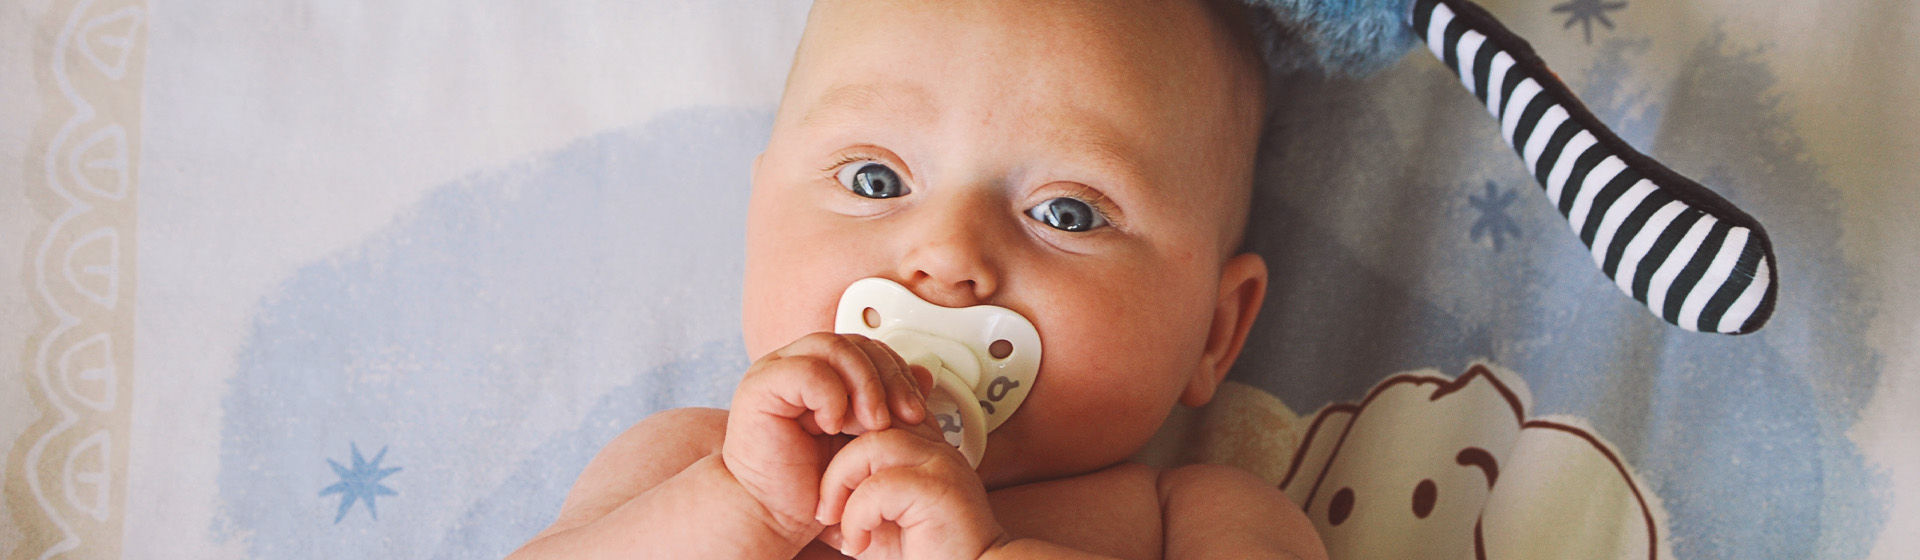 How Does a Pacifier Affect My Baby's Teeth?